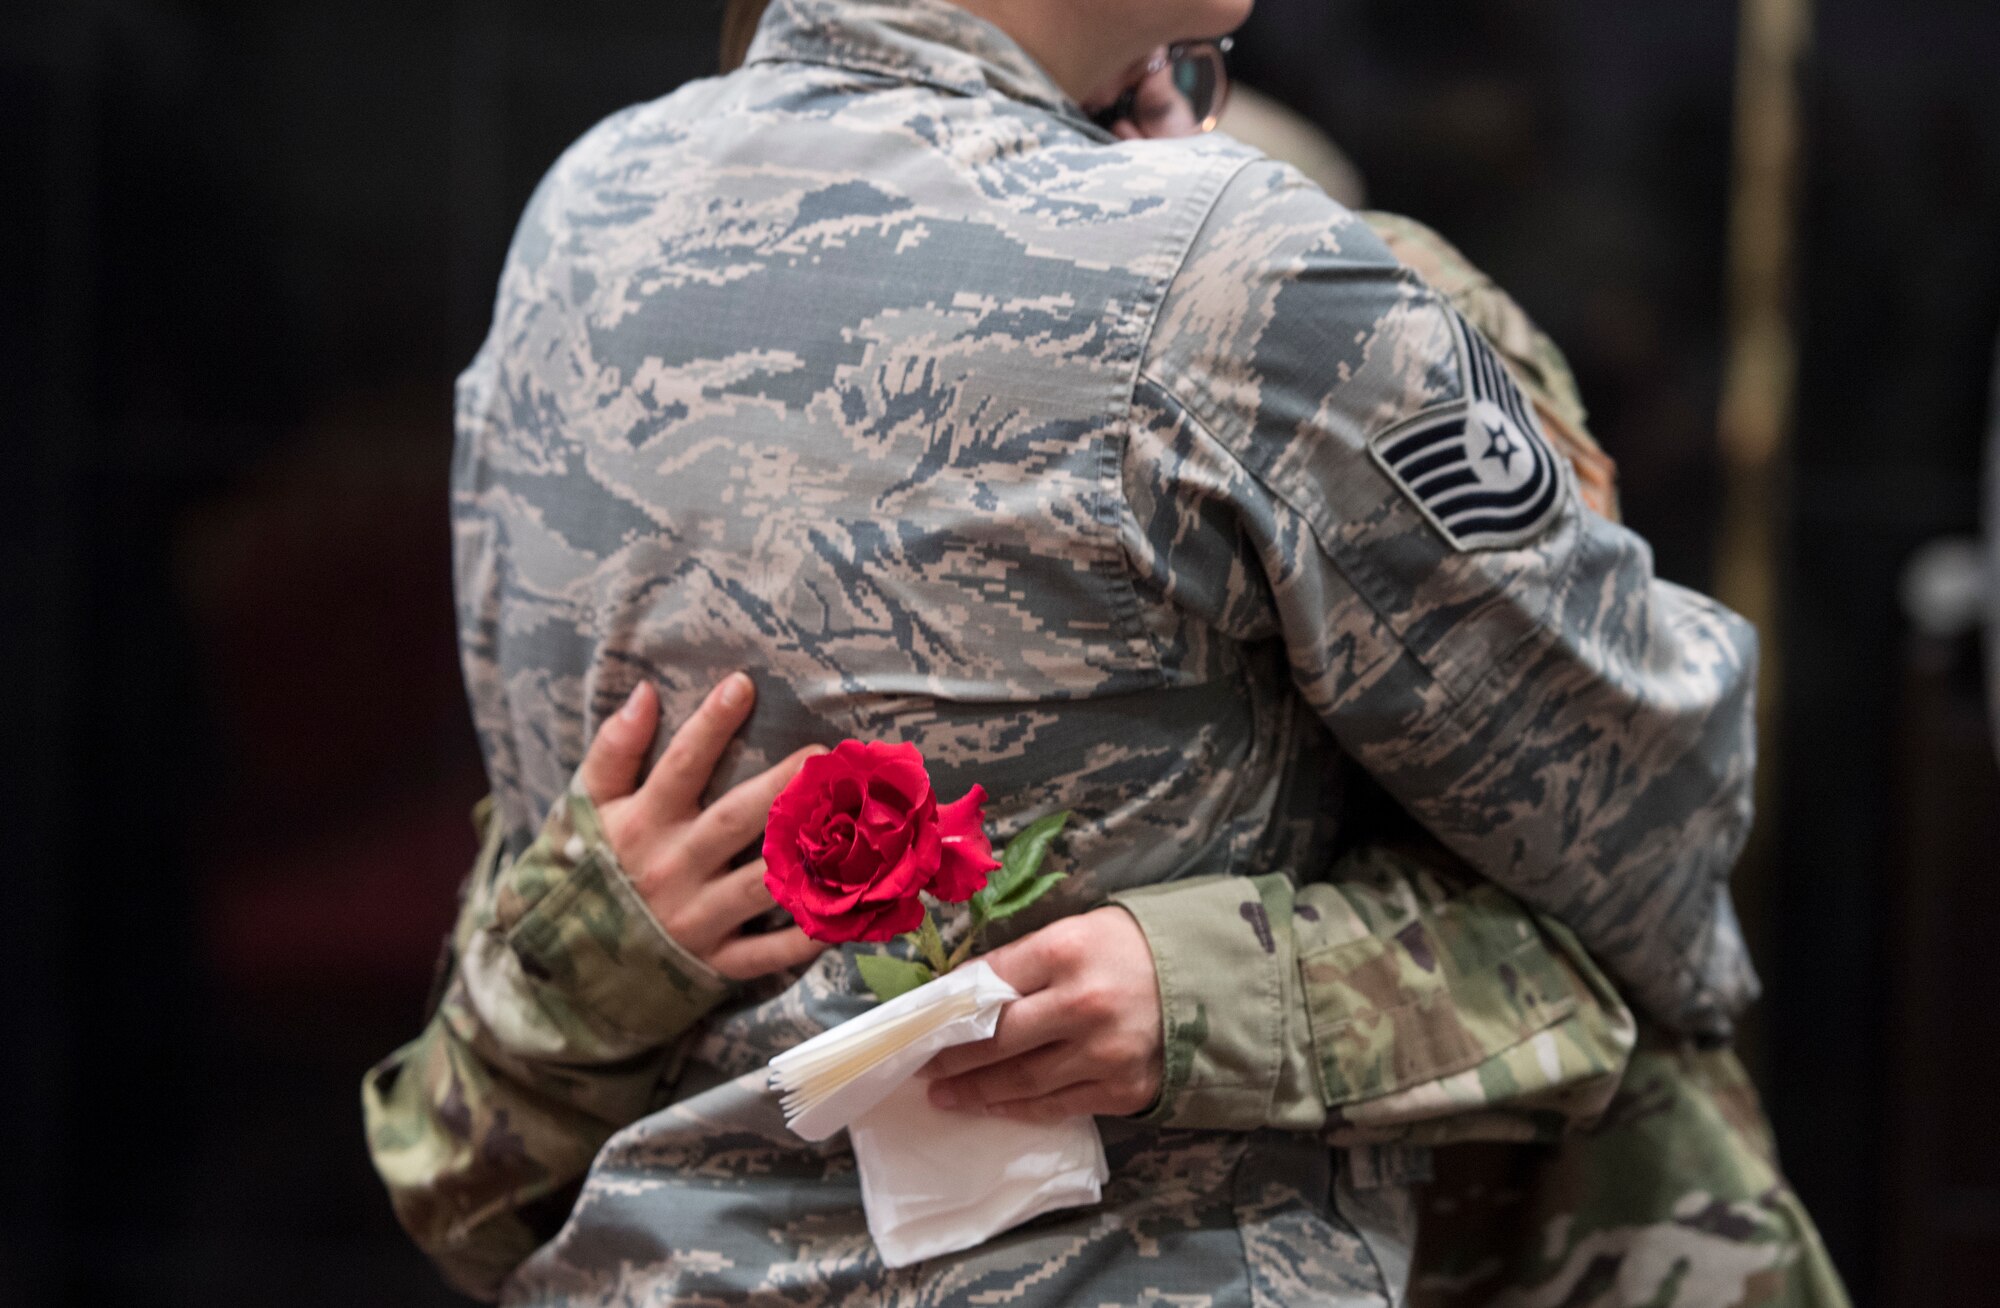 Airmen comfort each other during a memorial service for a colleague who committed suicide, Incirlik Air Base, Turkey, May 17, 2019. In 2019, 137 Airmen in active duty, the Air National Guard and Air Force Reserve. (U.S. Air Force photo by Staff Sgt. Joshua Magbanua)